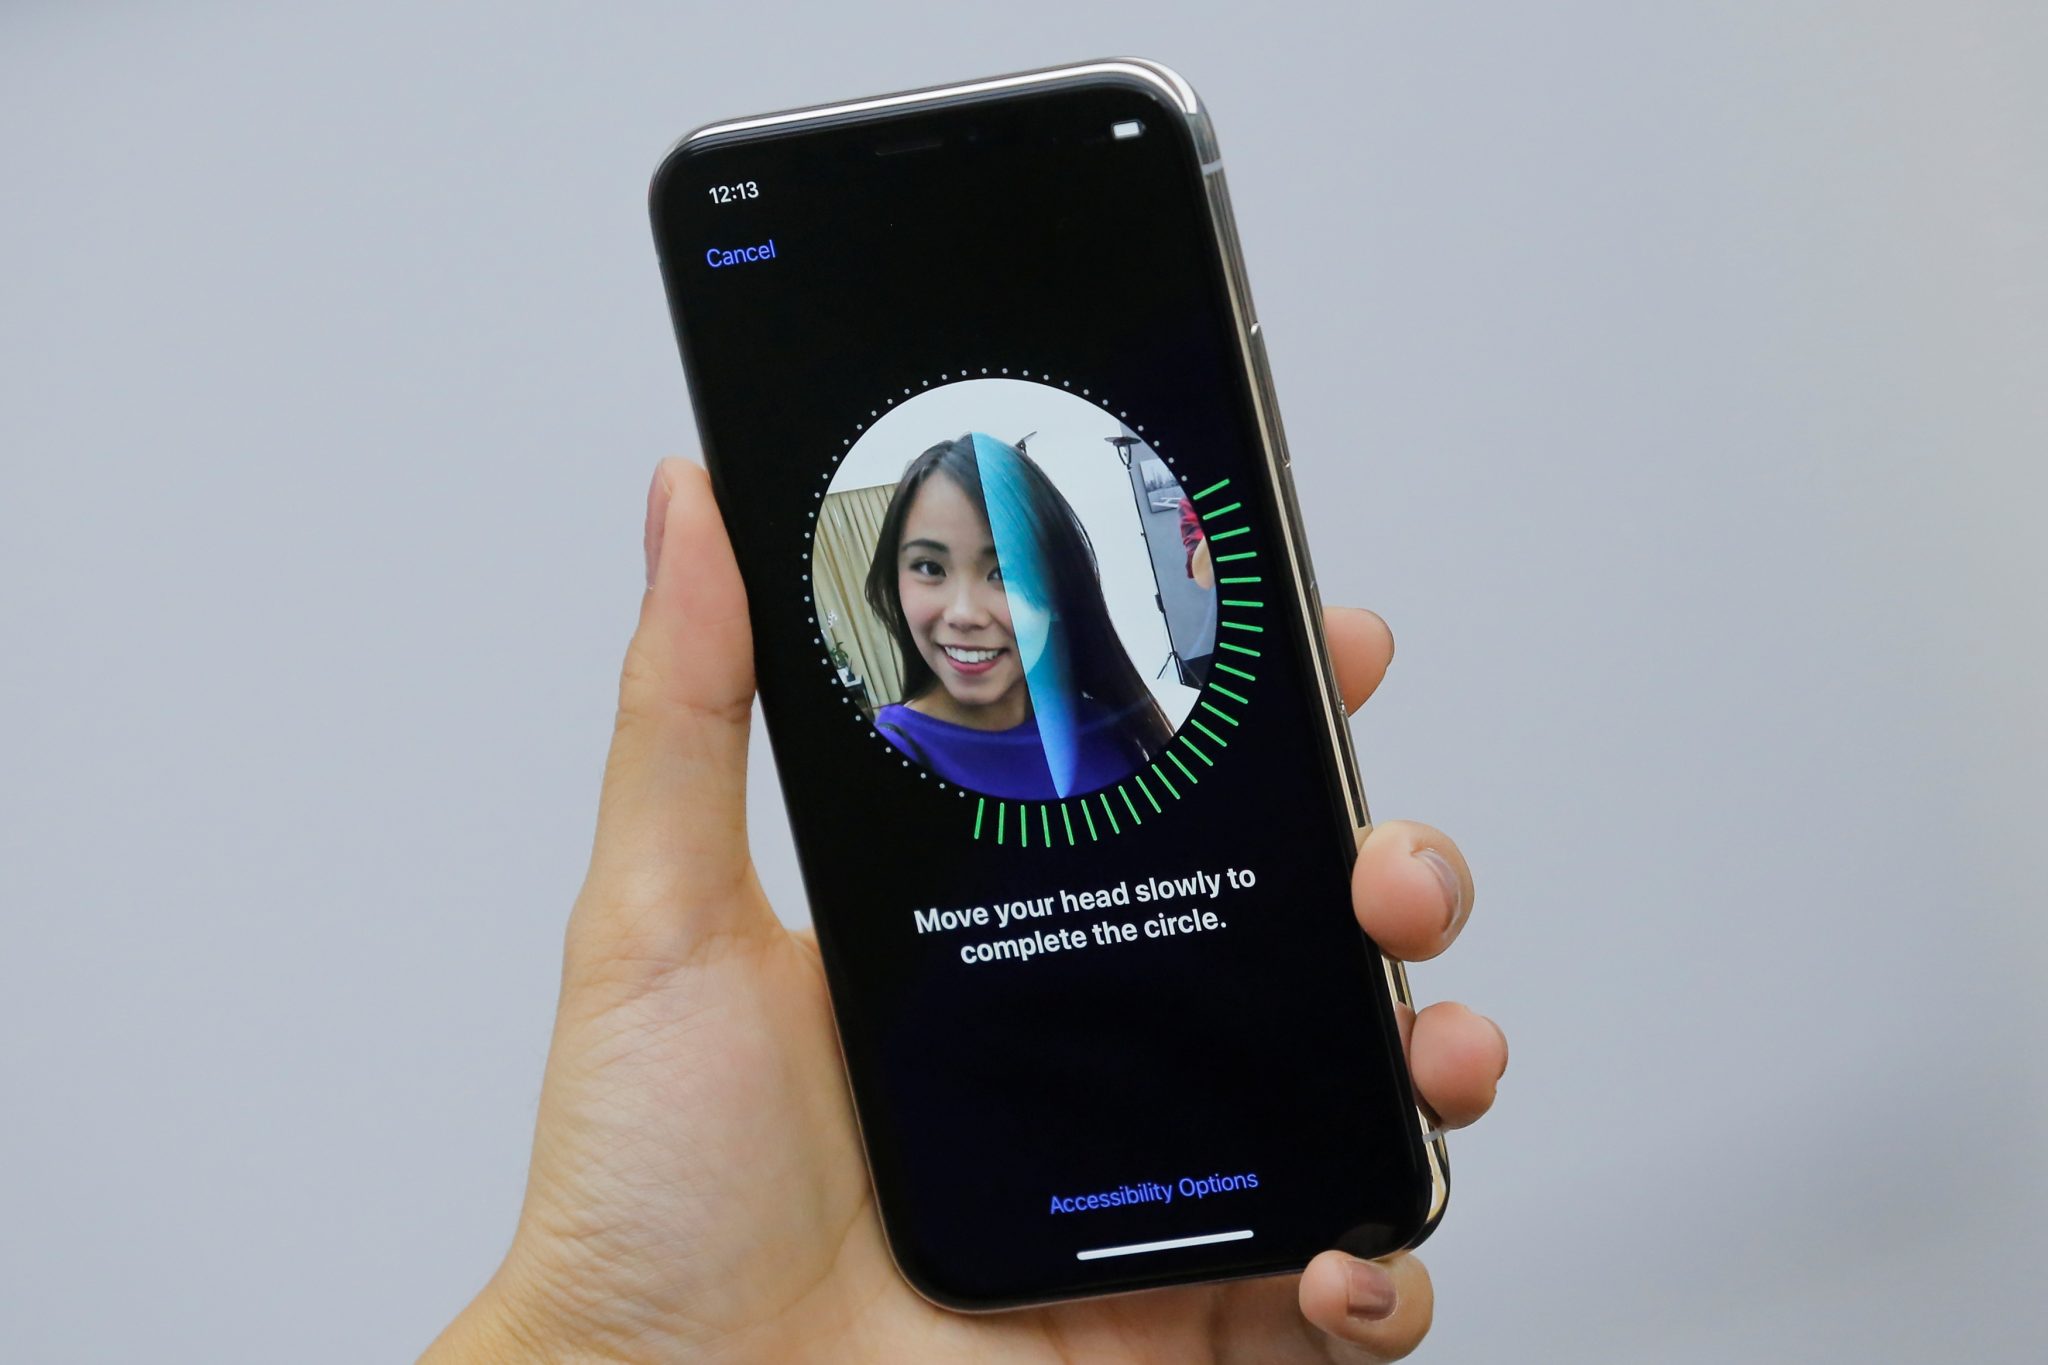 How To Use Face ID On iPhone X To Make Purchases